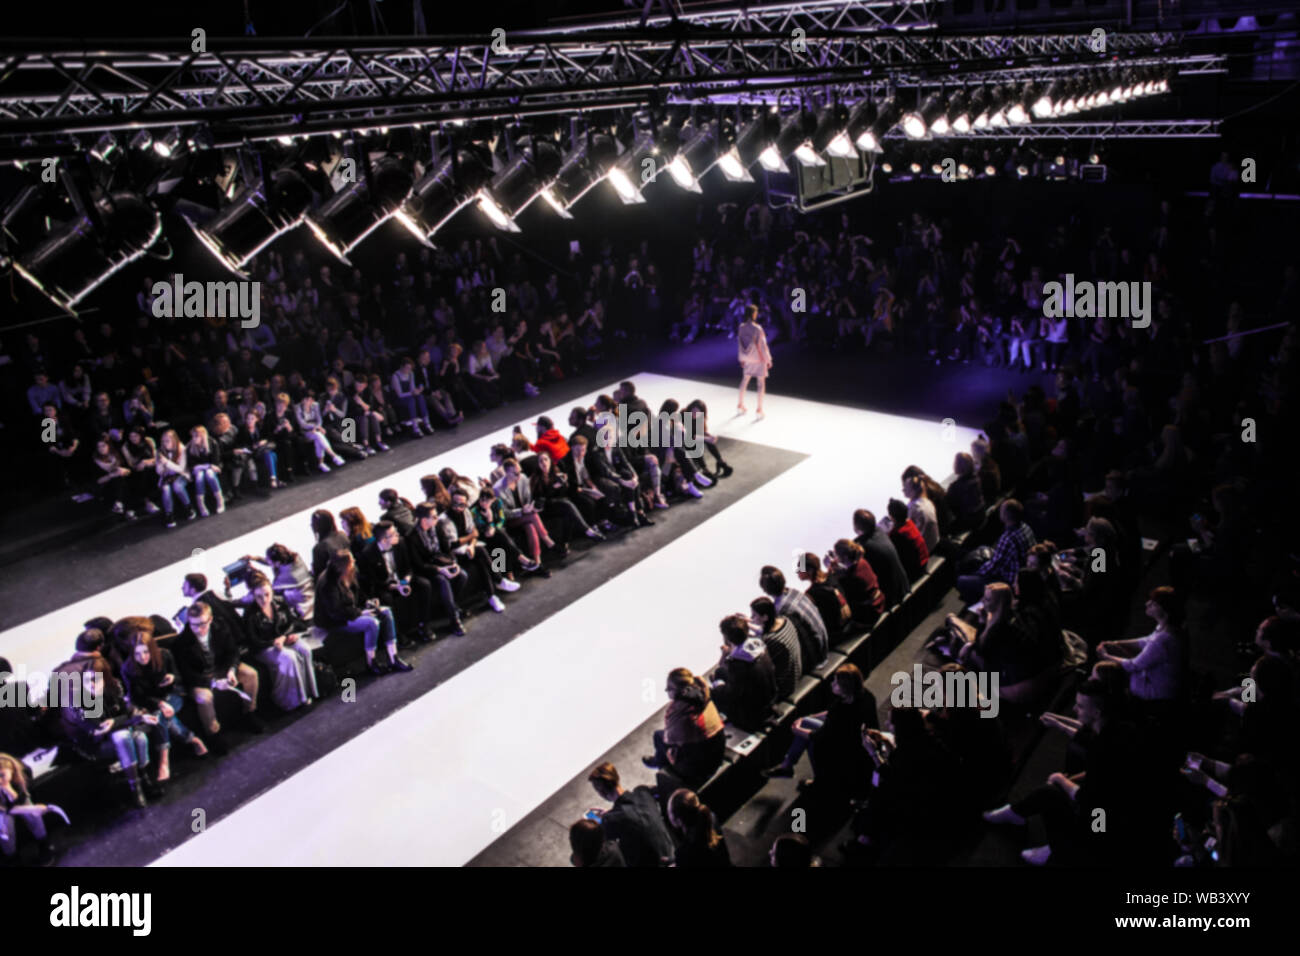 Catwalk runway & Stages for Fashion shows 